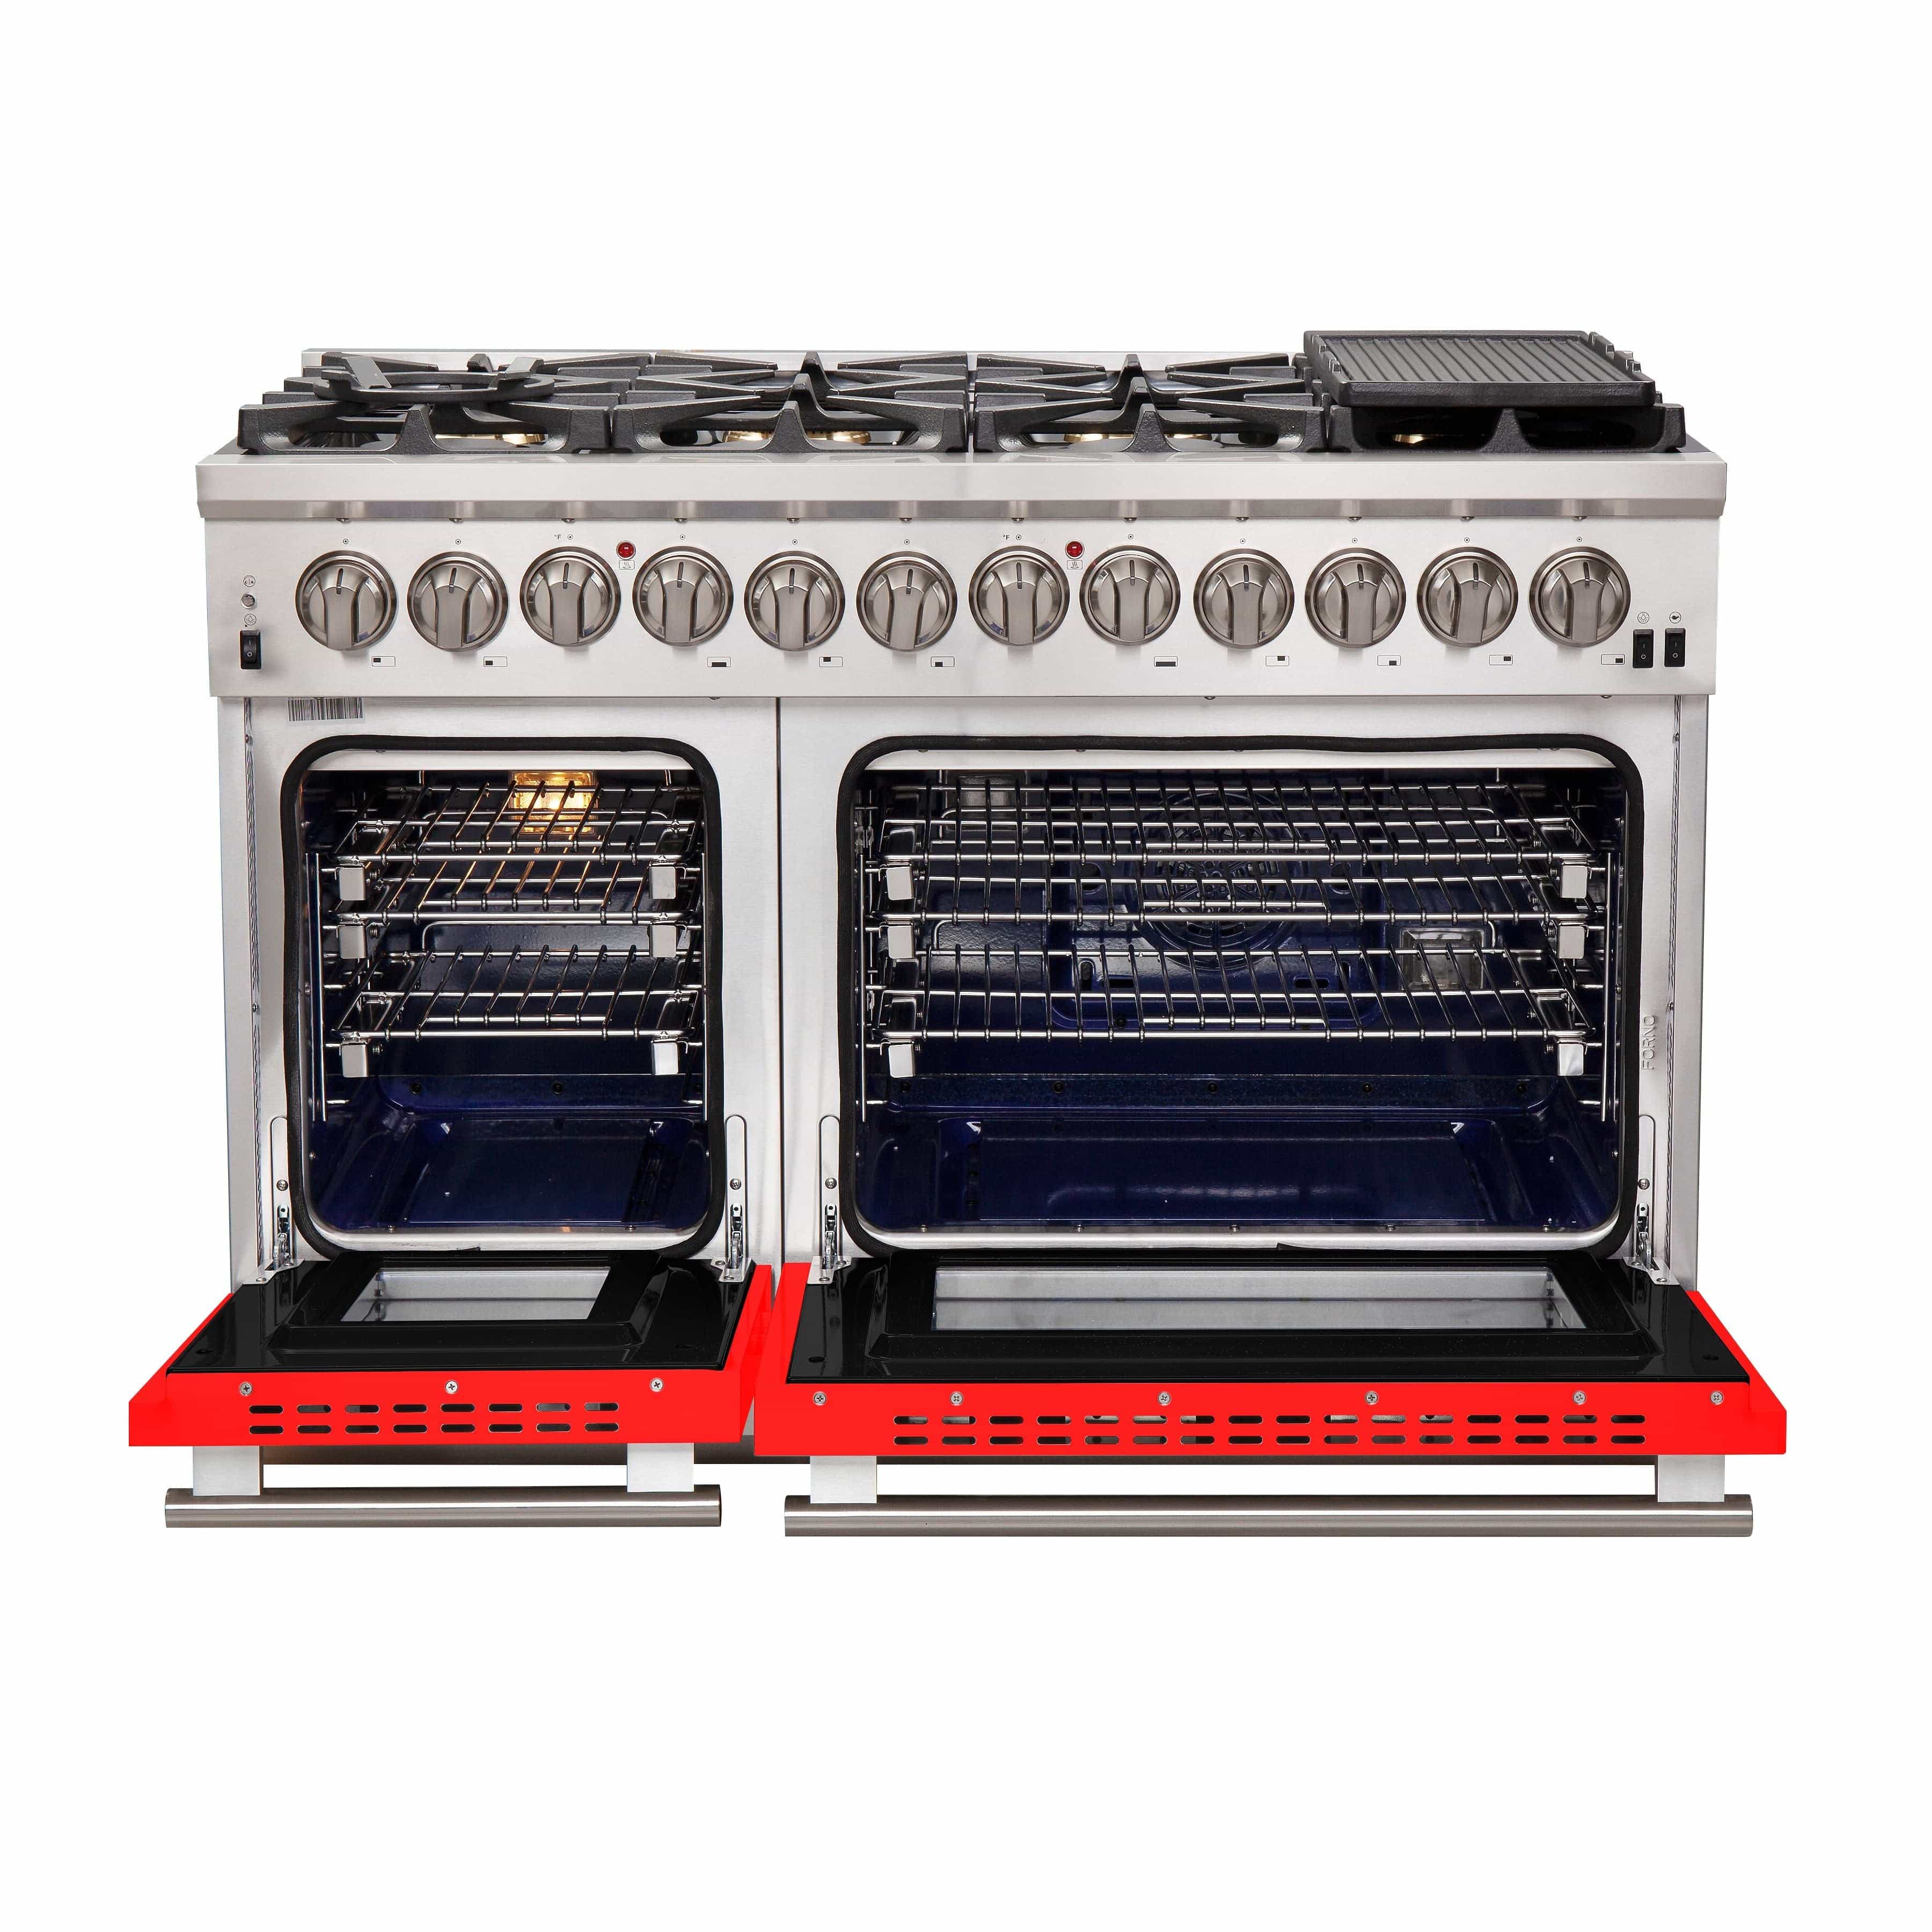 Forno 48 Inch Professional Freestanding Dual Fuel Range in Red, FFSGS6187-48RED Range FFSGS6187-48RED Luxury Appliances Direct